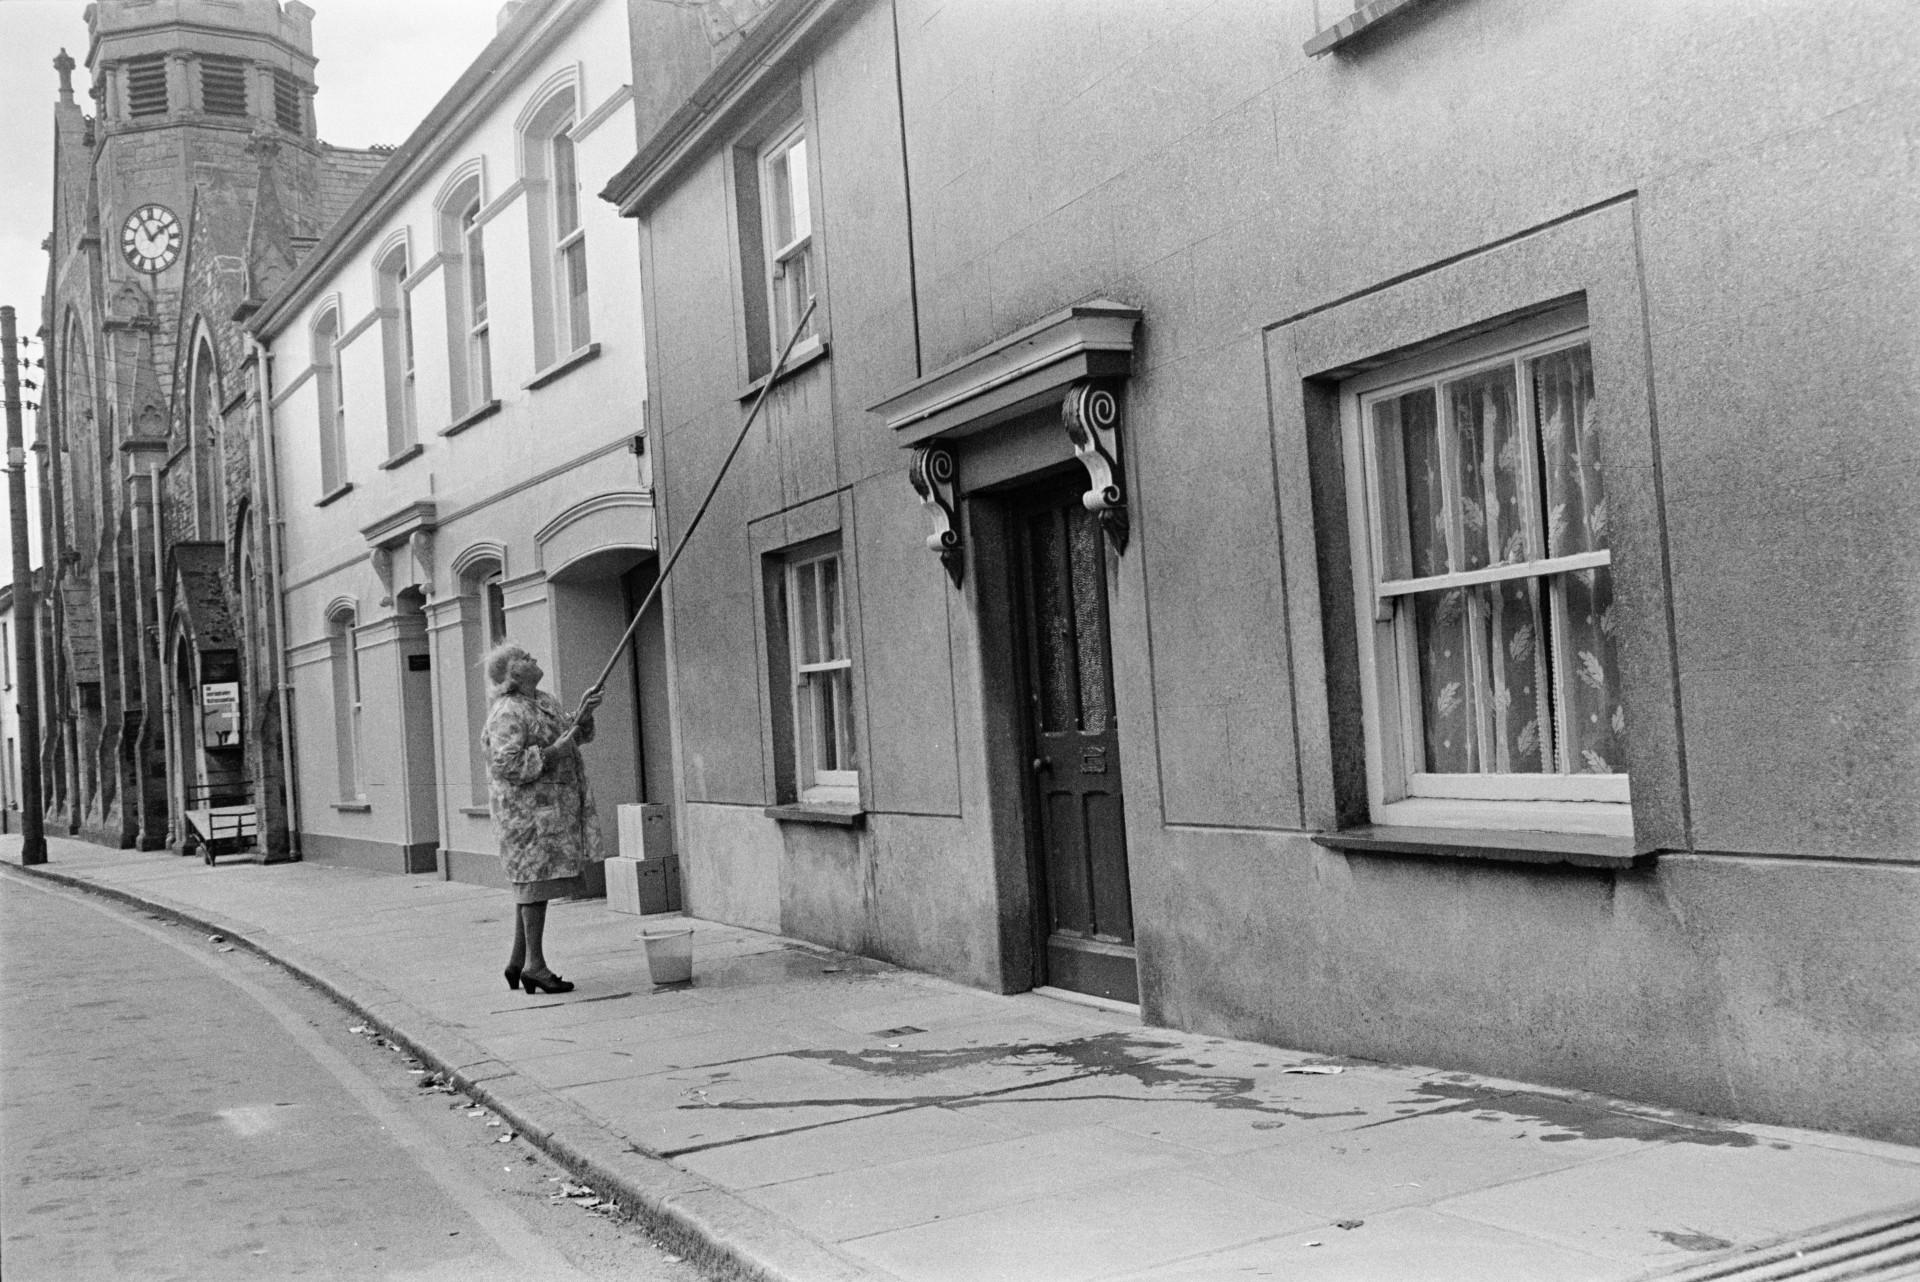 A woman cleaning first floor windows from the street outside, in Holsworthy. A church is visible in the background.